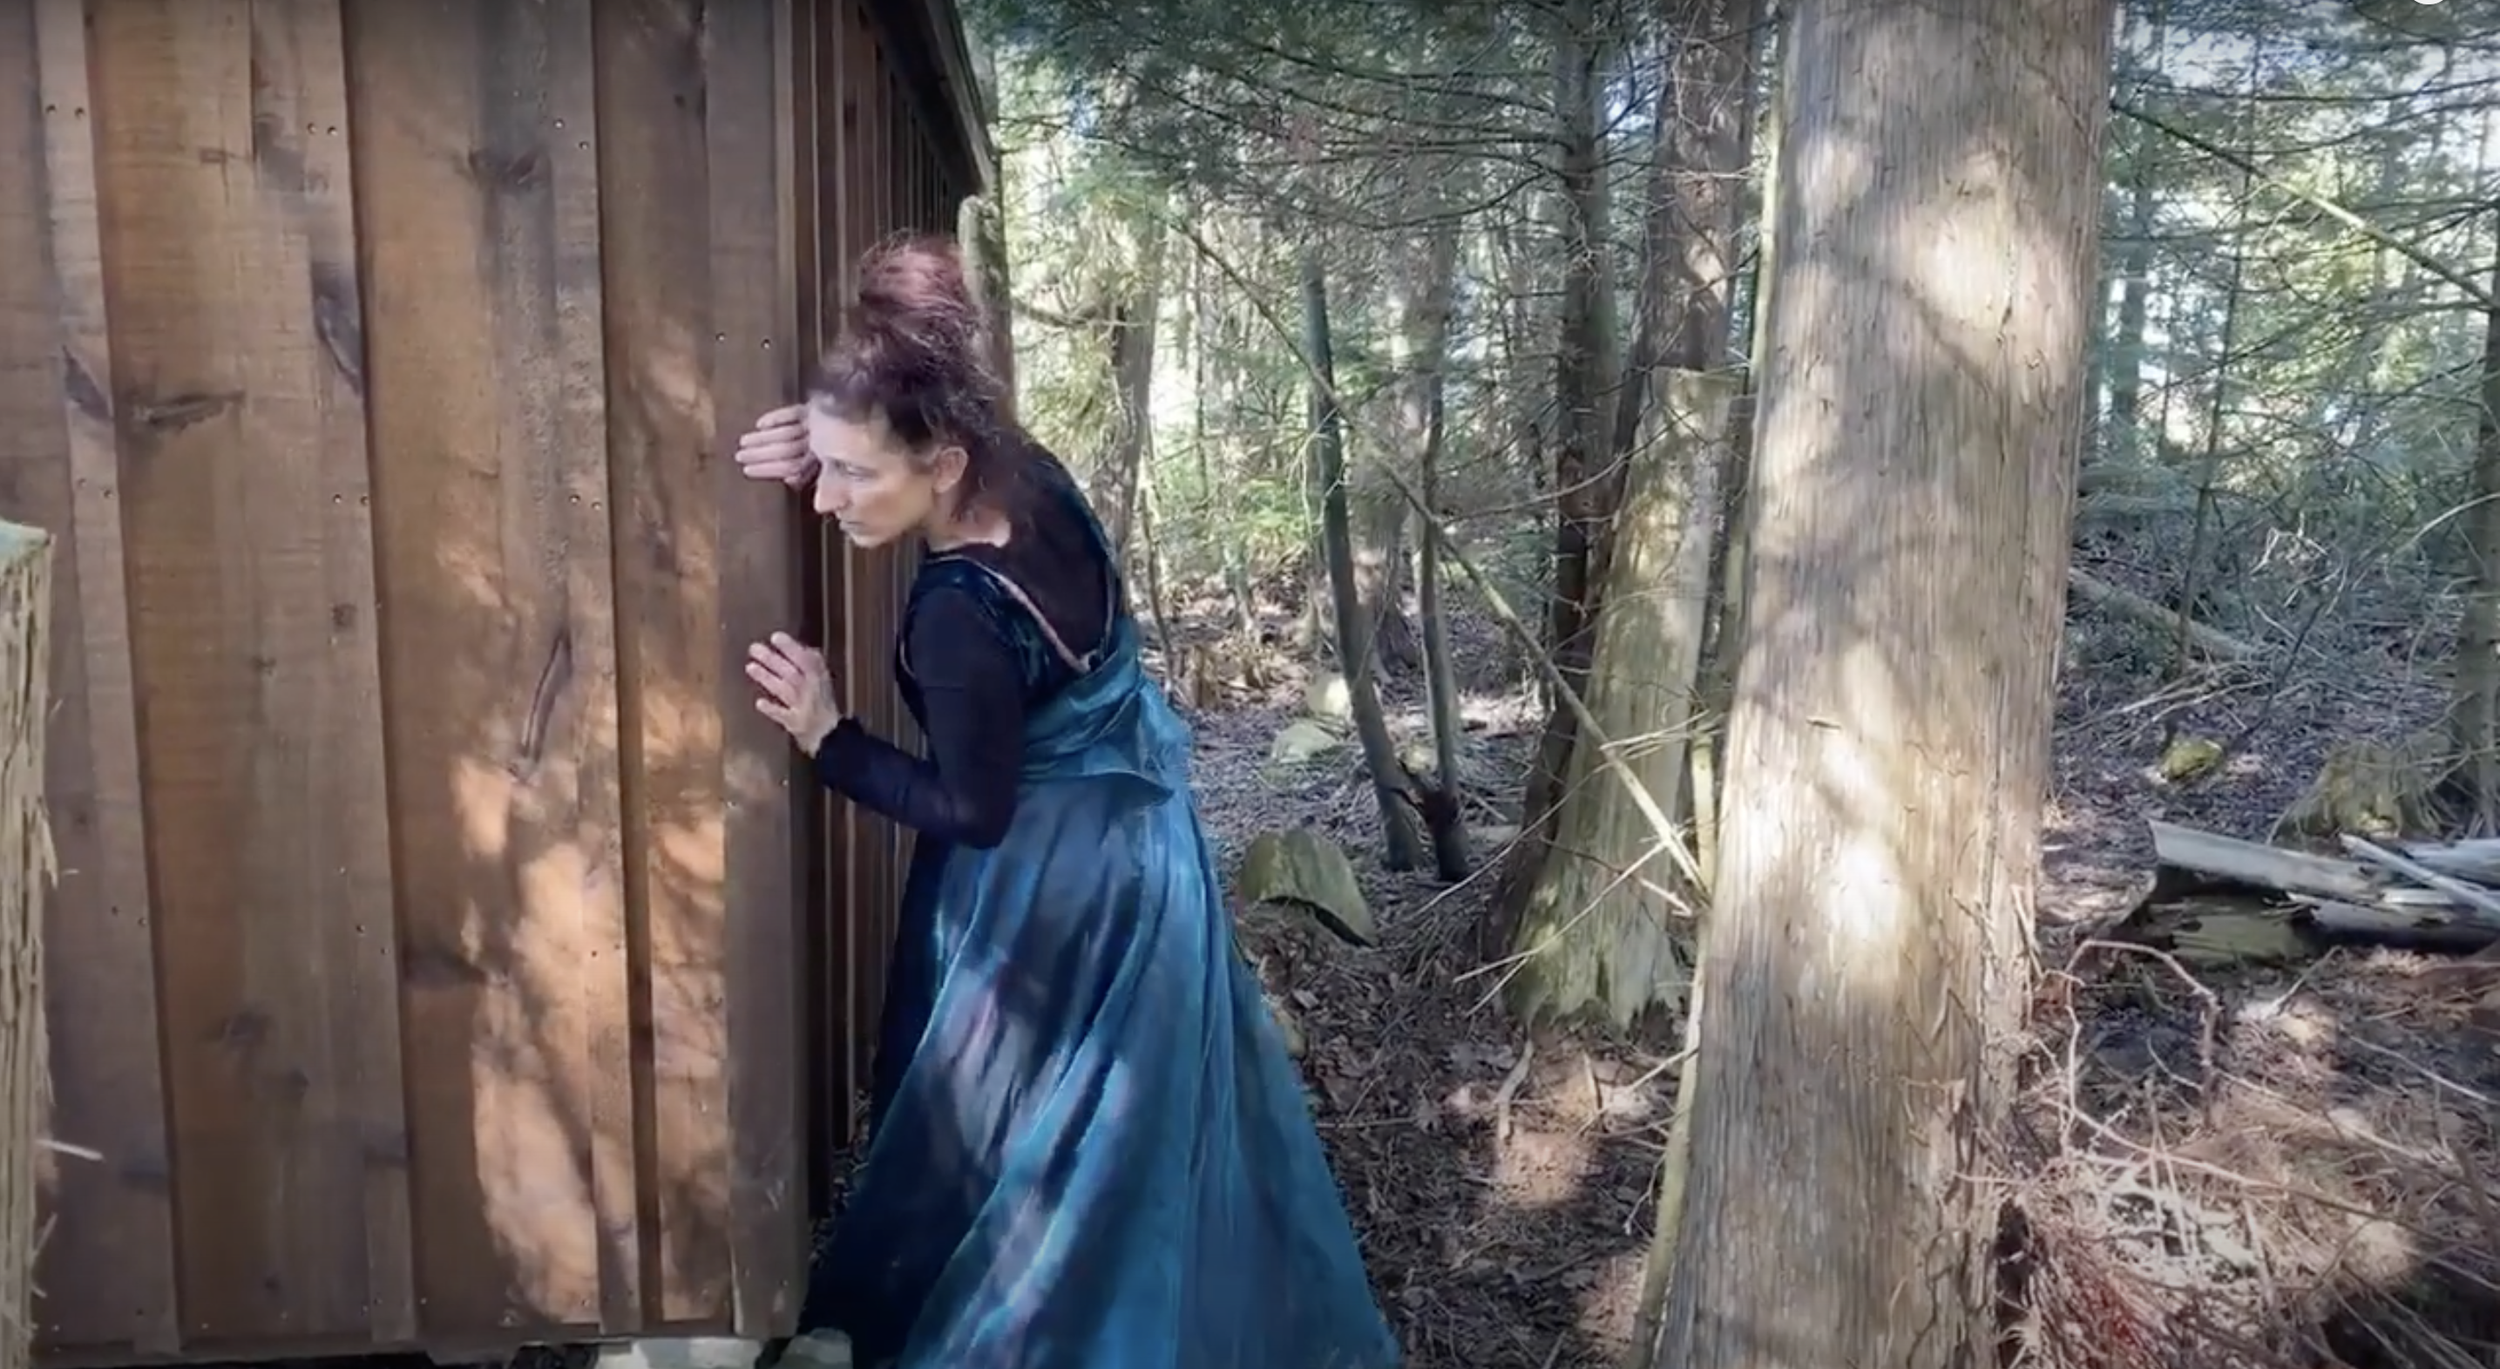 Woman in a blue dress peeking around a wooden shed in a forest area